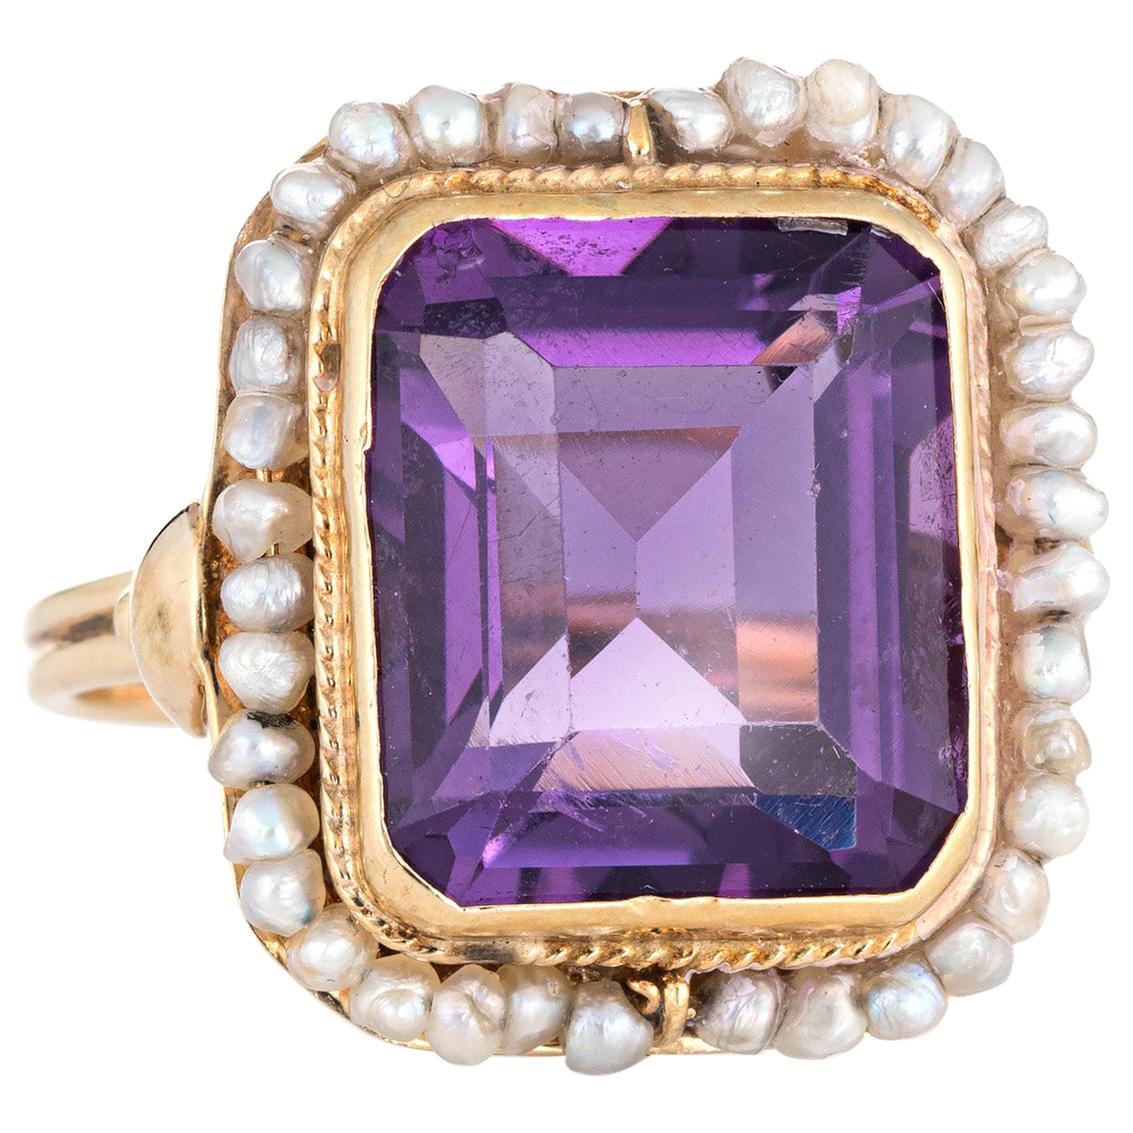 Vintage Amethyst Seed Pearl Ring 14 Karat Yellow Gold Square Cocktail Jewelry